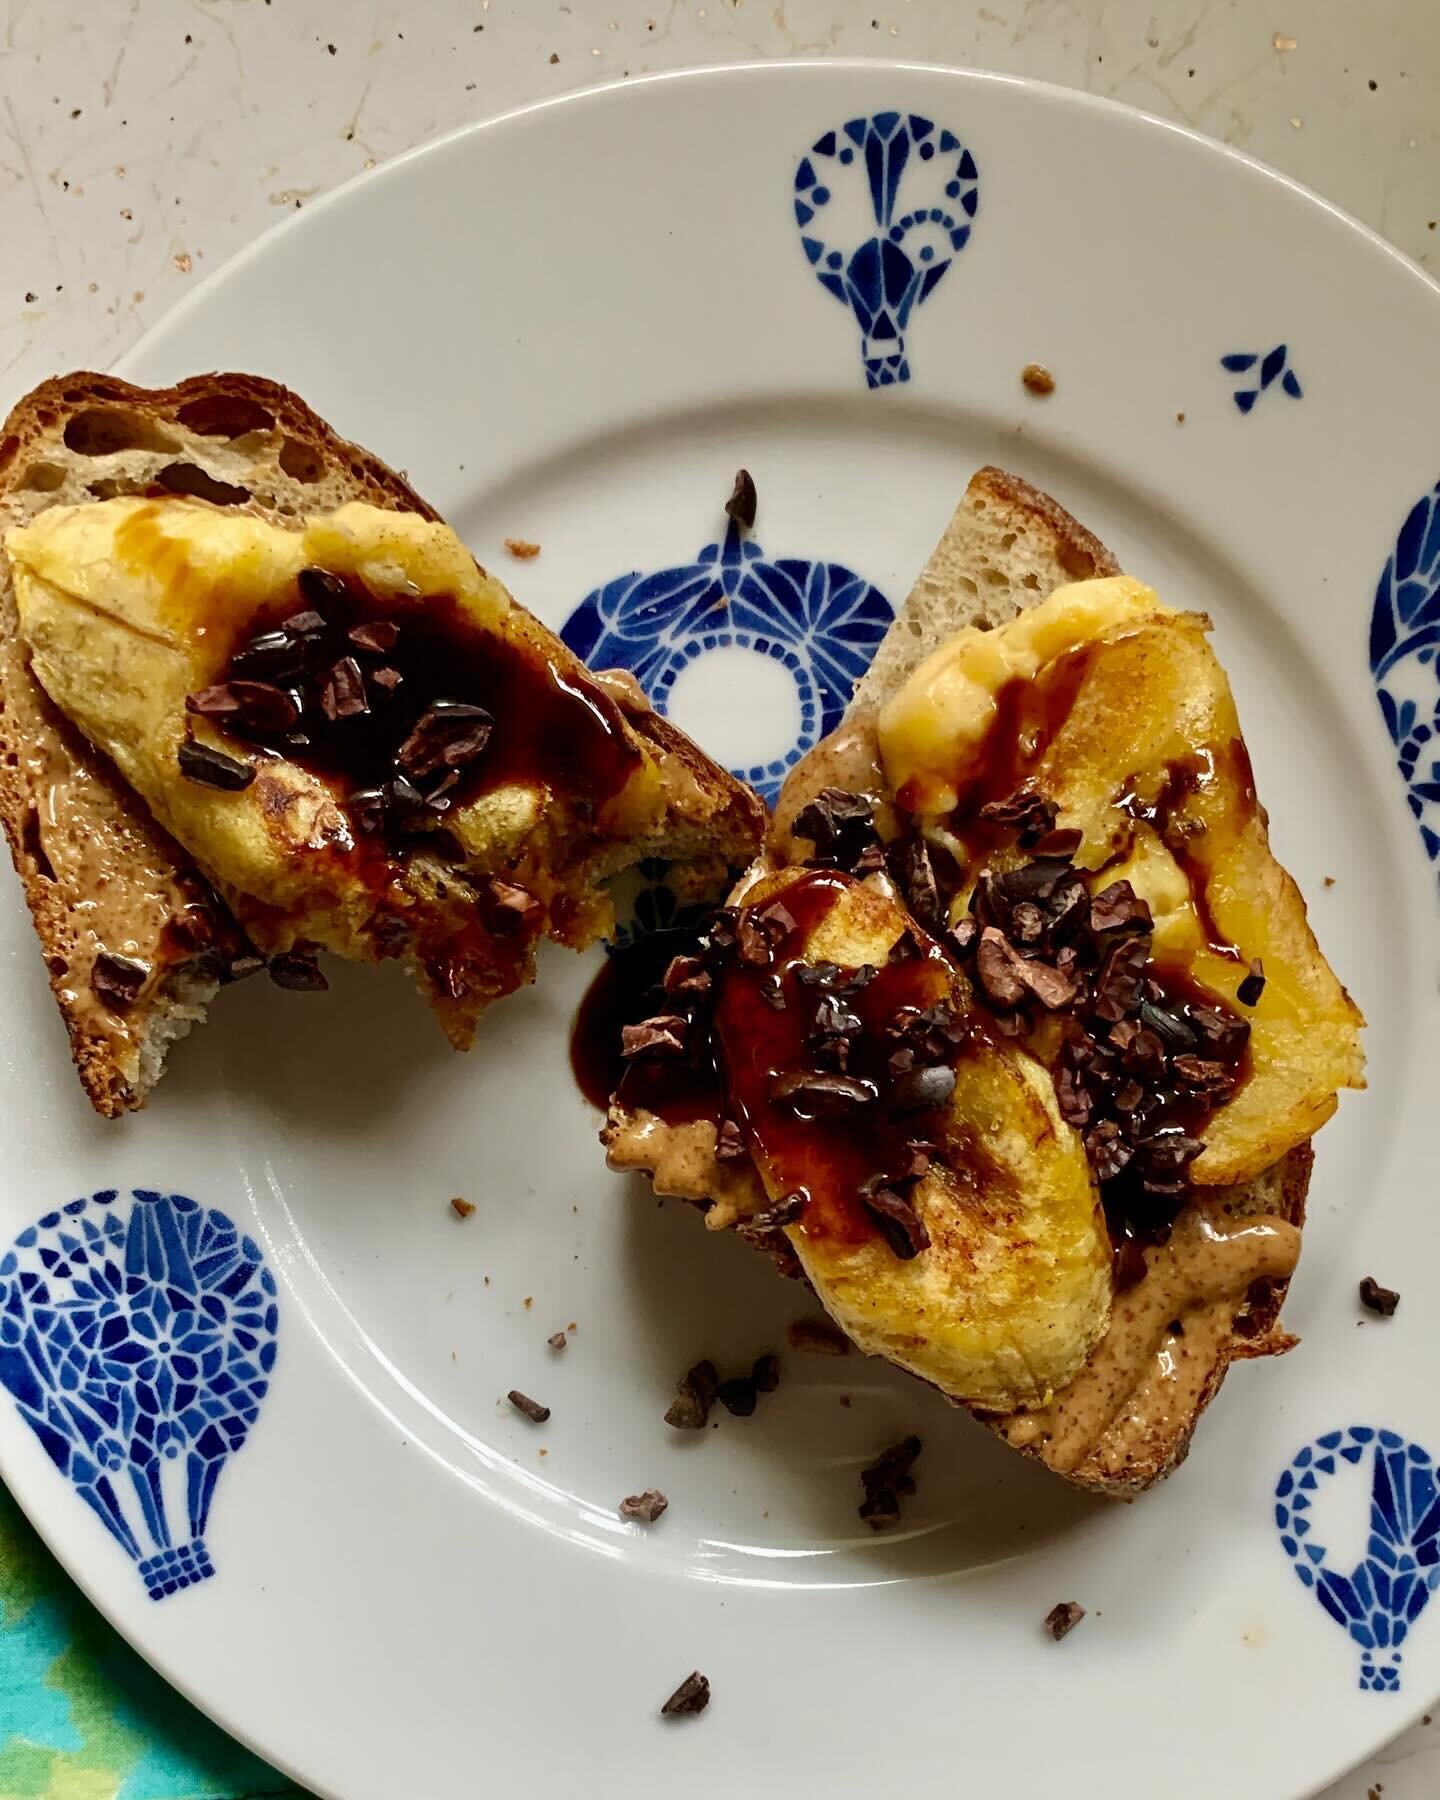 We will be closed today (Sat 4/6) as previously stated it&rsquo;s a complicated week for childcare and staffing. So instead I&rsquo;ll be here eating Sourdough Rye toast w/ almond butter, plantain, cocoa nibs, &amp; date syrup and making weird music 